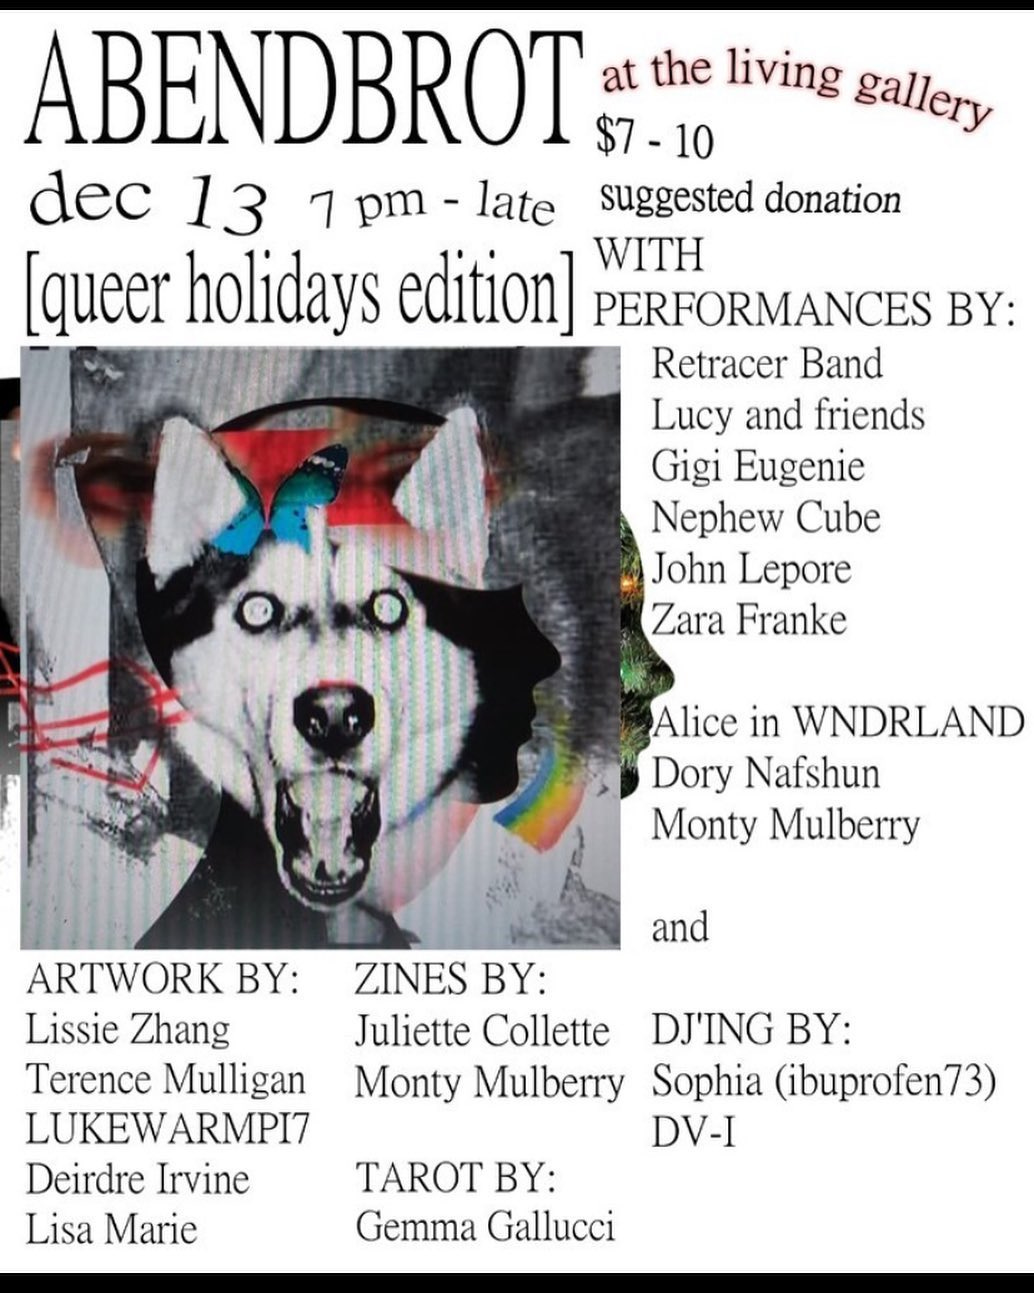 May be an image of dog and text that says 'ABENDBROT $7-10 10 at the living gallery dec 13 7 pm- late suggested donation [queer holidays edition] WITH PERFORMANCES BY: Retracer Band Lucy and friends Gigi Eugenie Nephew Cube John Lepore Zara Franke Alice in WNDRLAND Dory Nafshun Monty Mulberry and ARTWORK BY: Lissie Zhang Terence Mulligan LUKEWARMPI7 Deirdre Irvine Lisa Marie ZINES BY: Juliette Collette DJ'ING BY: Monty Mulberry Sophia (ibuprofen73) DV-I TAROT BY: Gemma Gallucci'